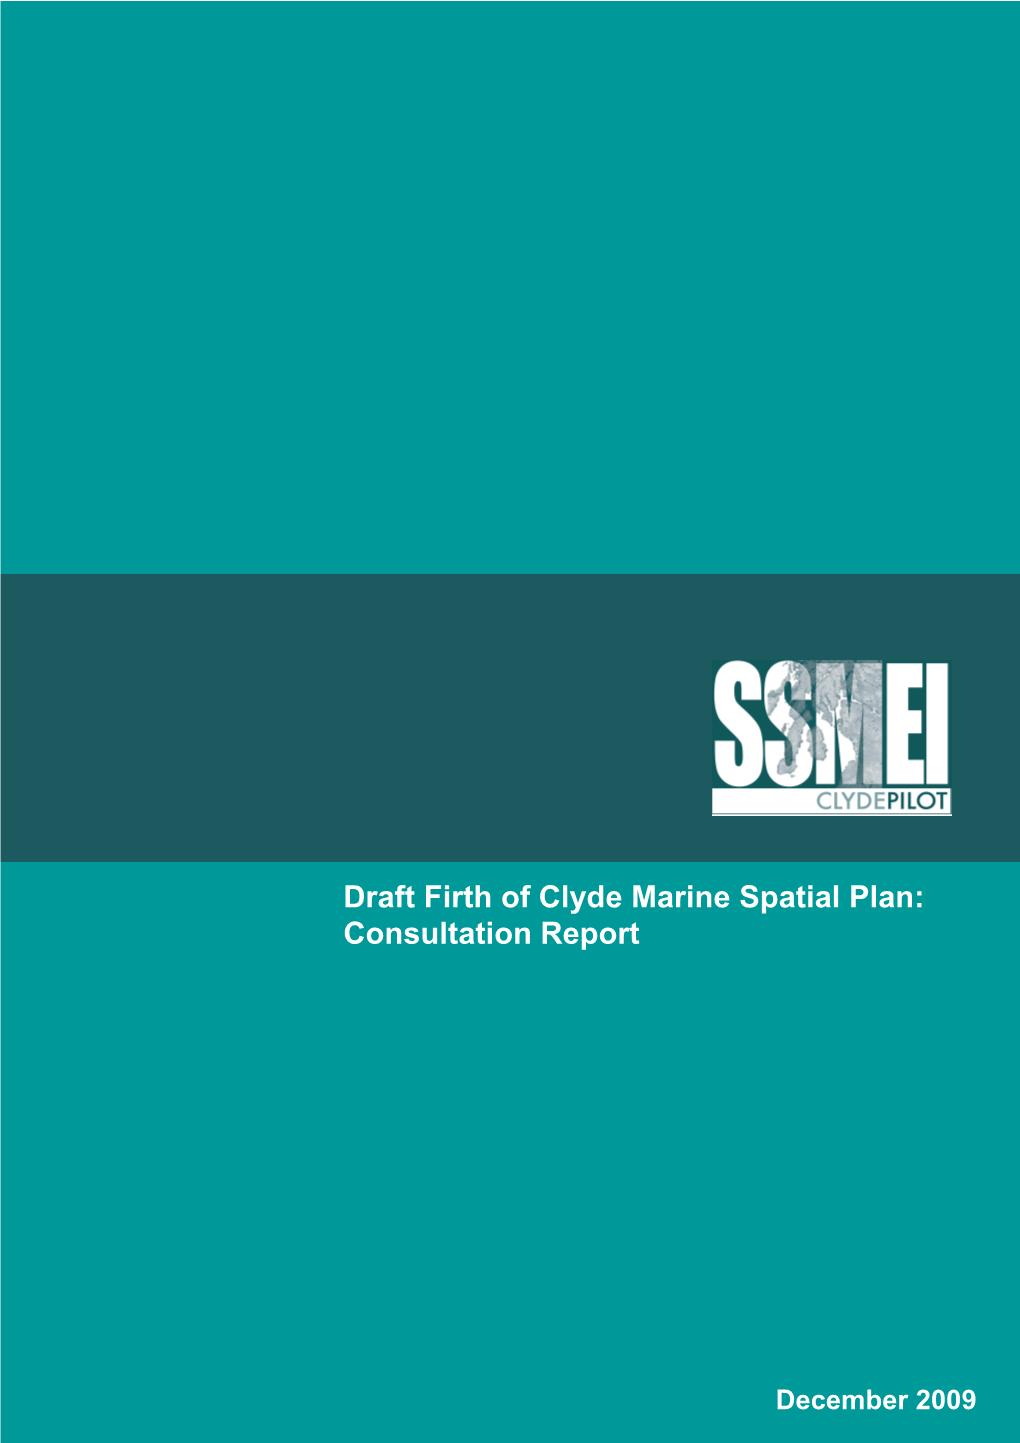 Draft Firth of Clyde Marine Spatial Plan: Consultation Report